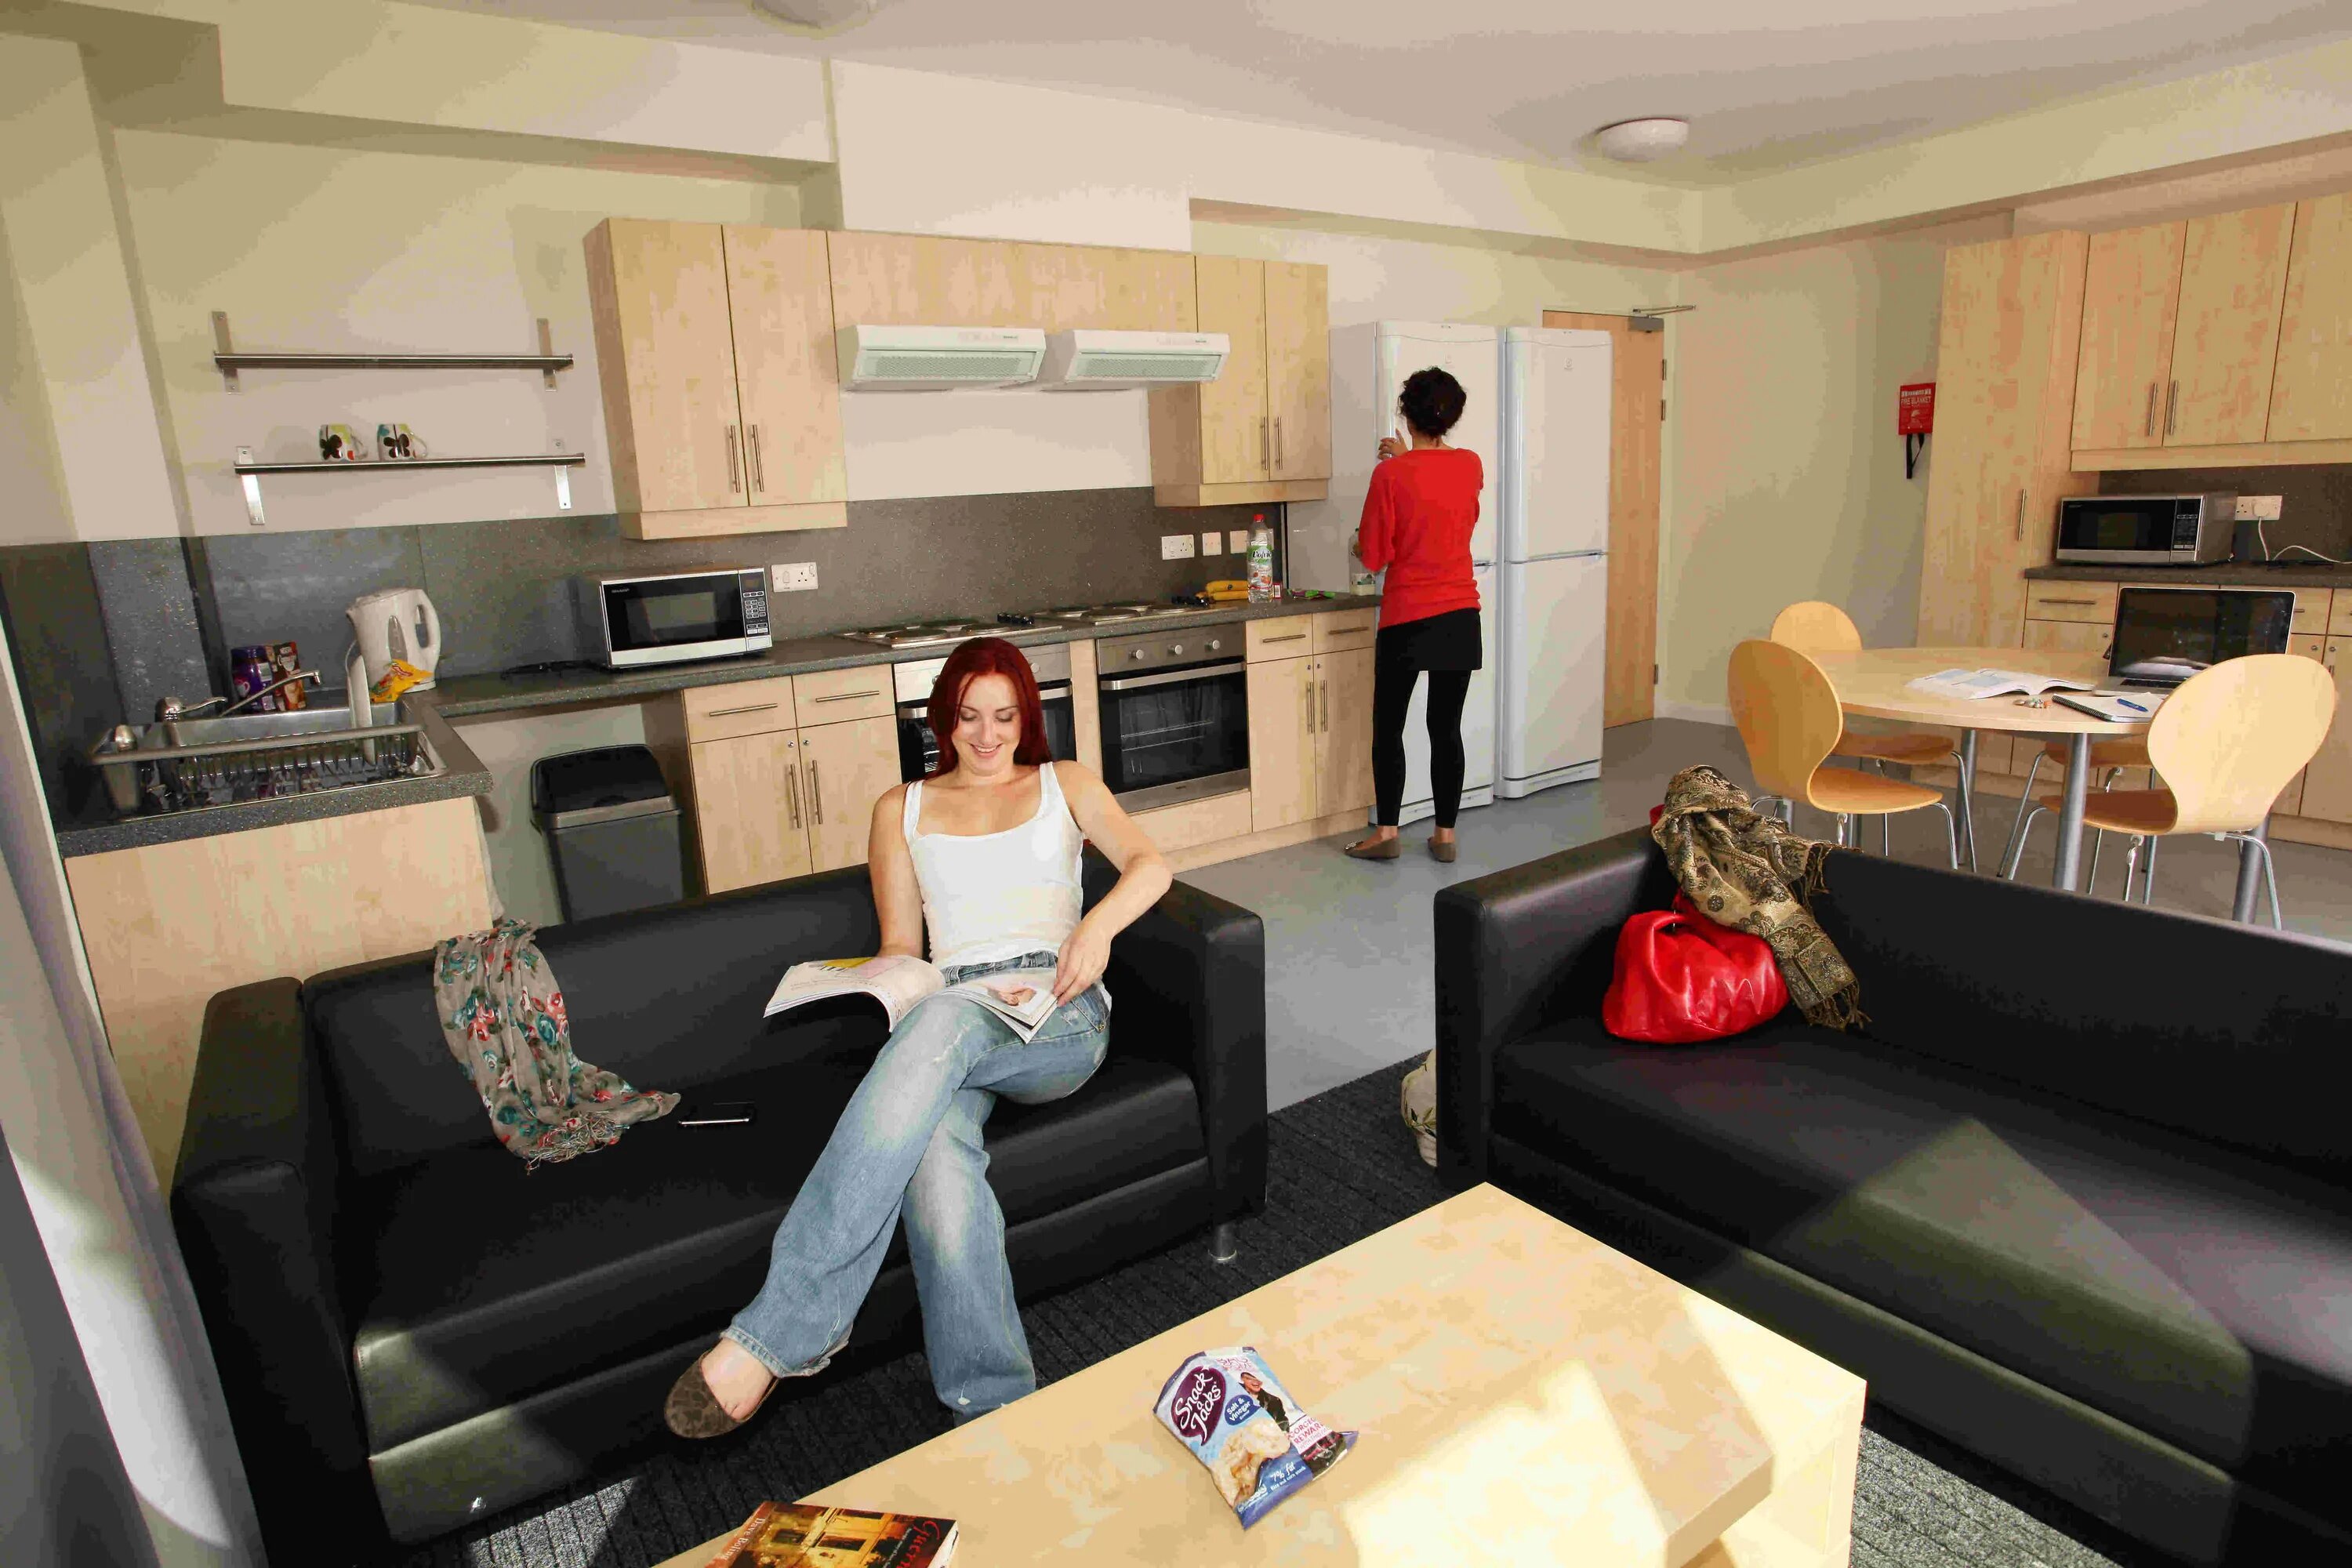 Student Living Room. Rent sharing Series квартира на двоих. Shared Apartment. Students Living House. Share a flat